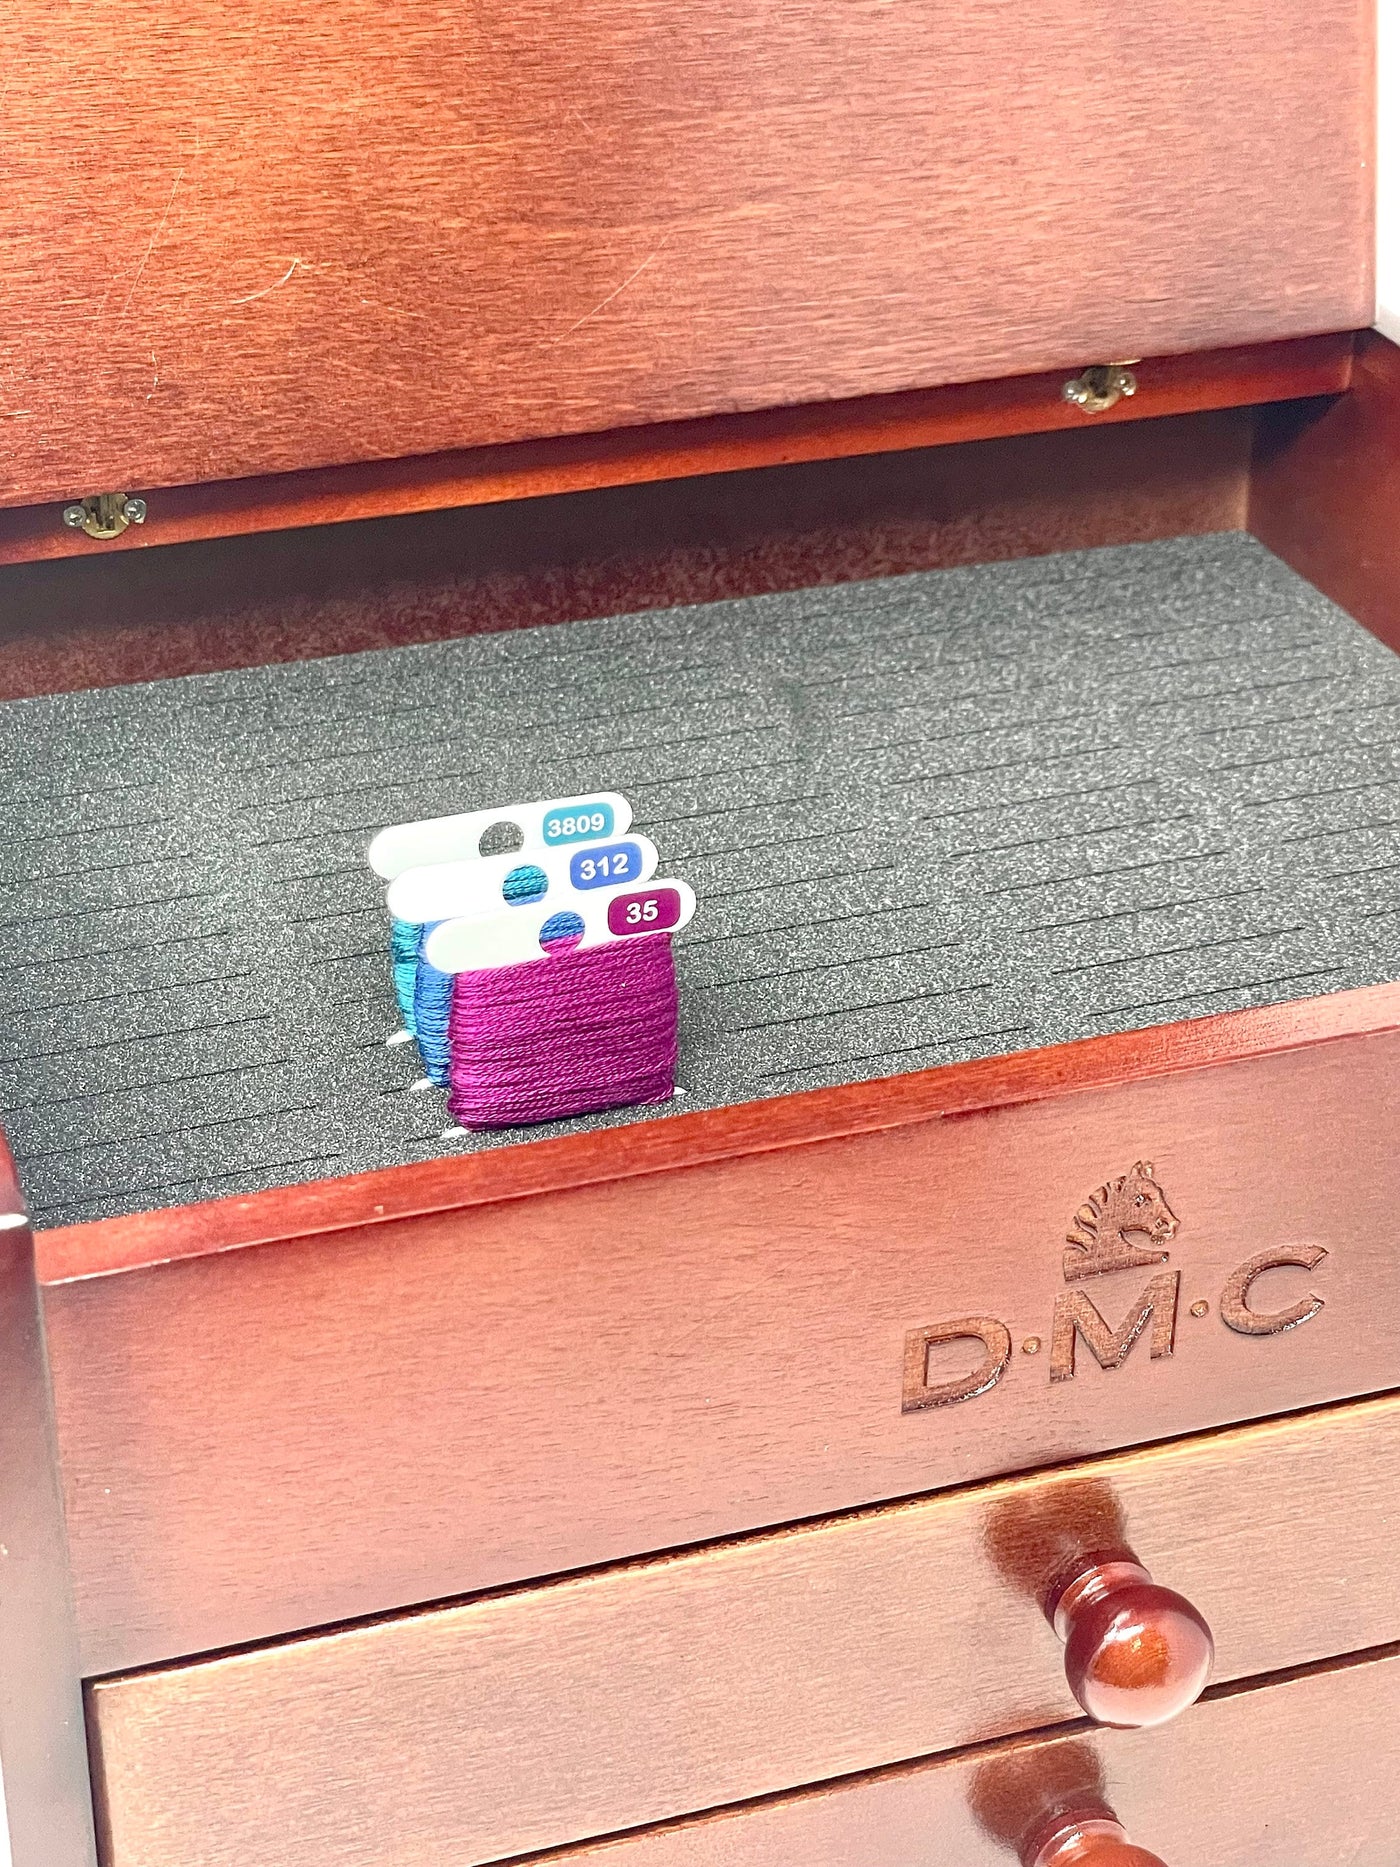 Foam insert for the TOP of the DMC Petite Vintage chest (holds x80 bobbins)